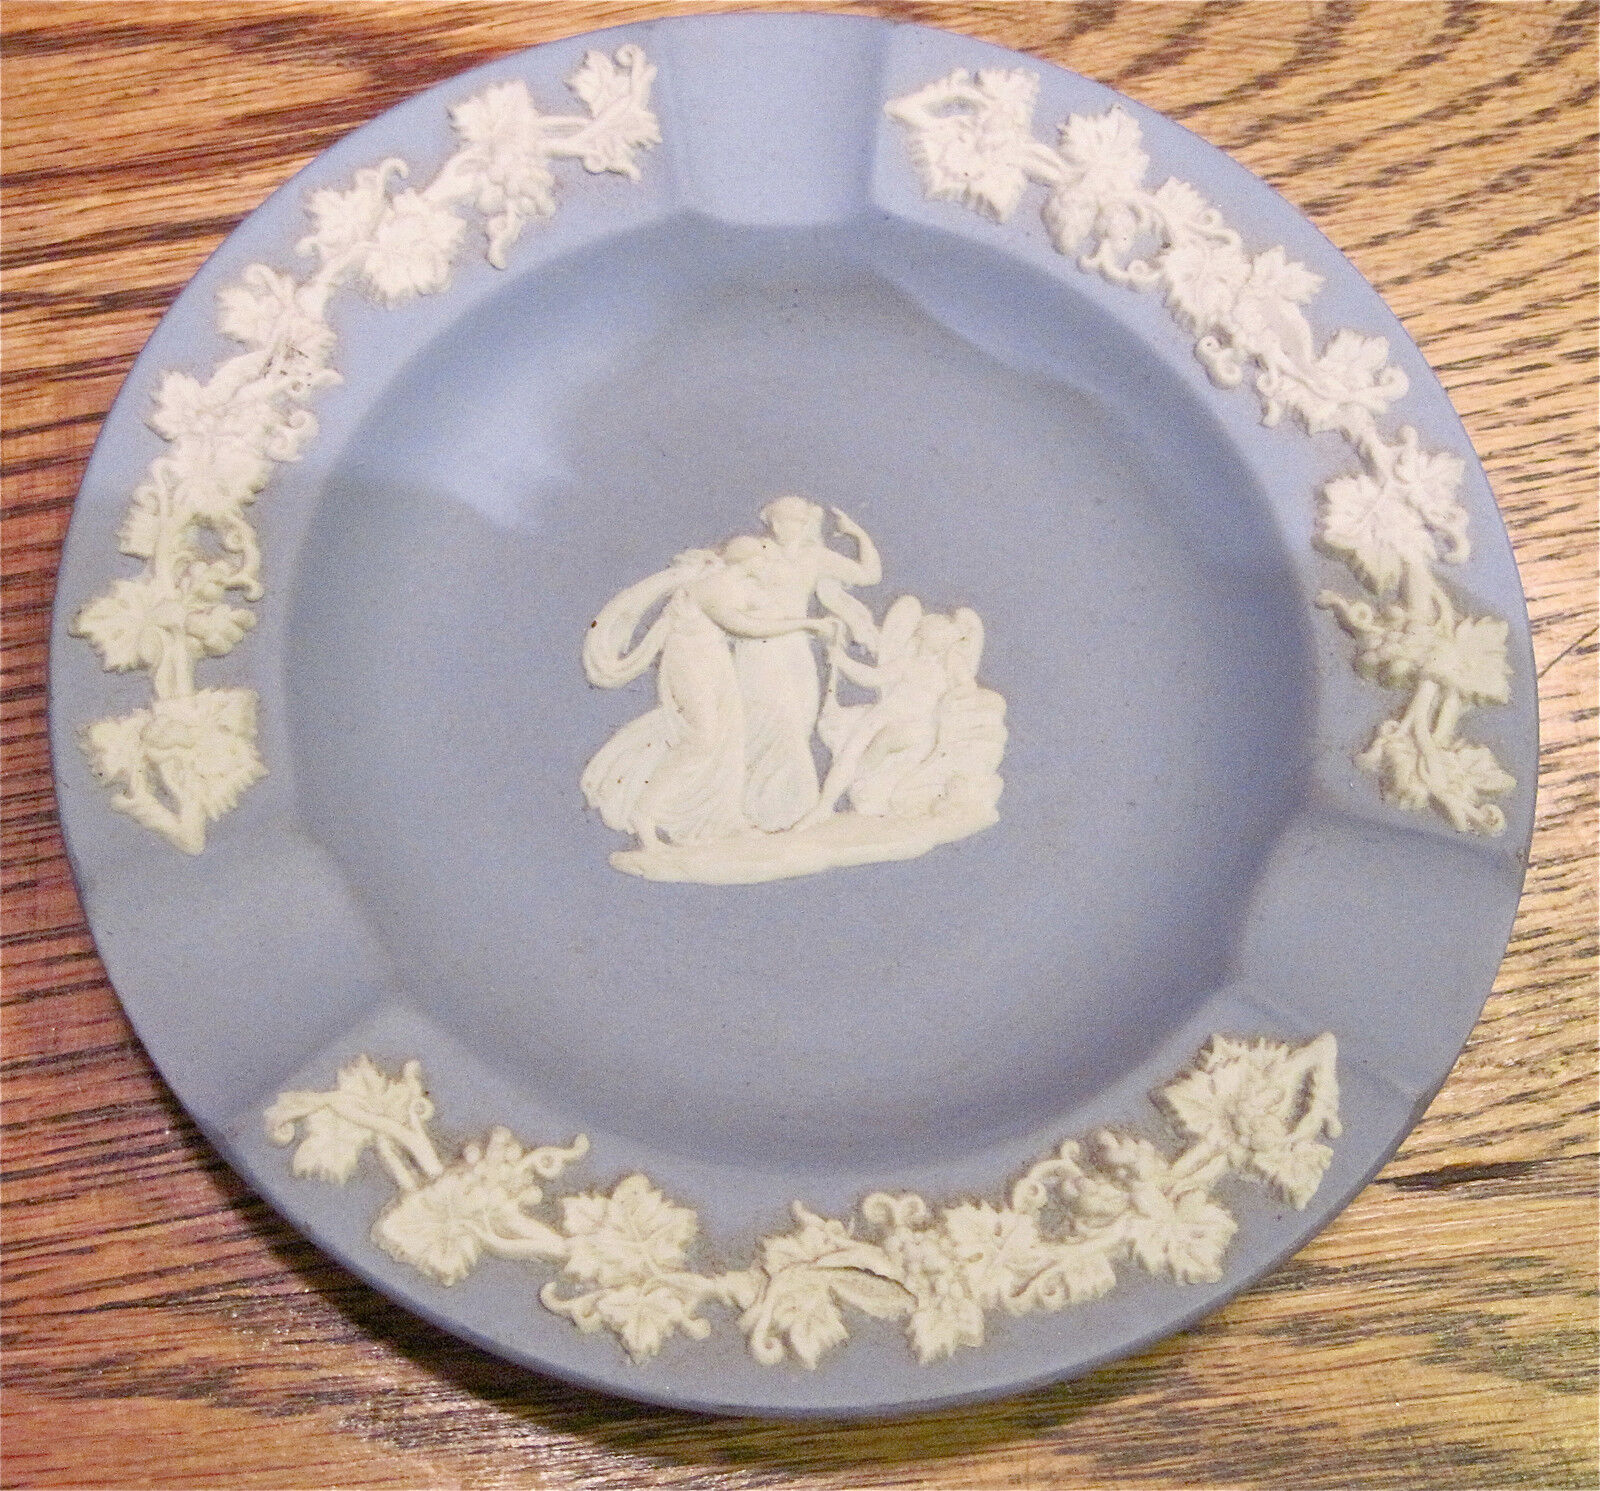 1960s--VINTAGE WEDGWOOD ASH TRAY--MADE IN ENGLAND--NEVER USED--NMT